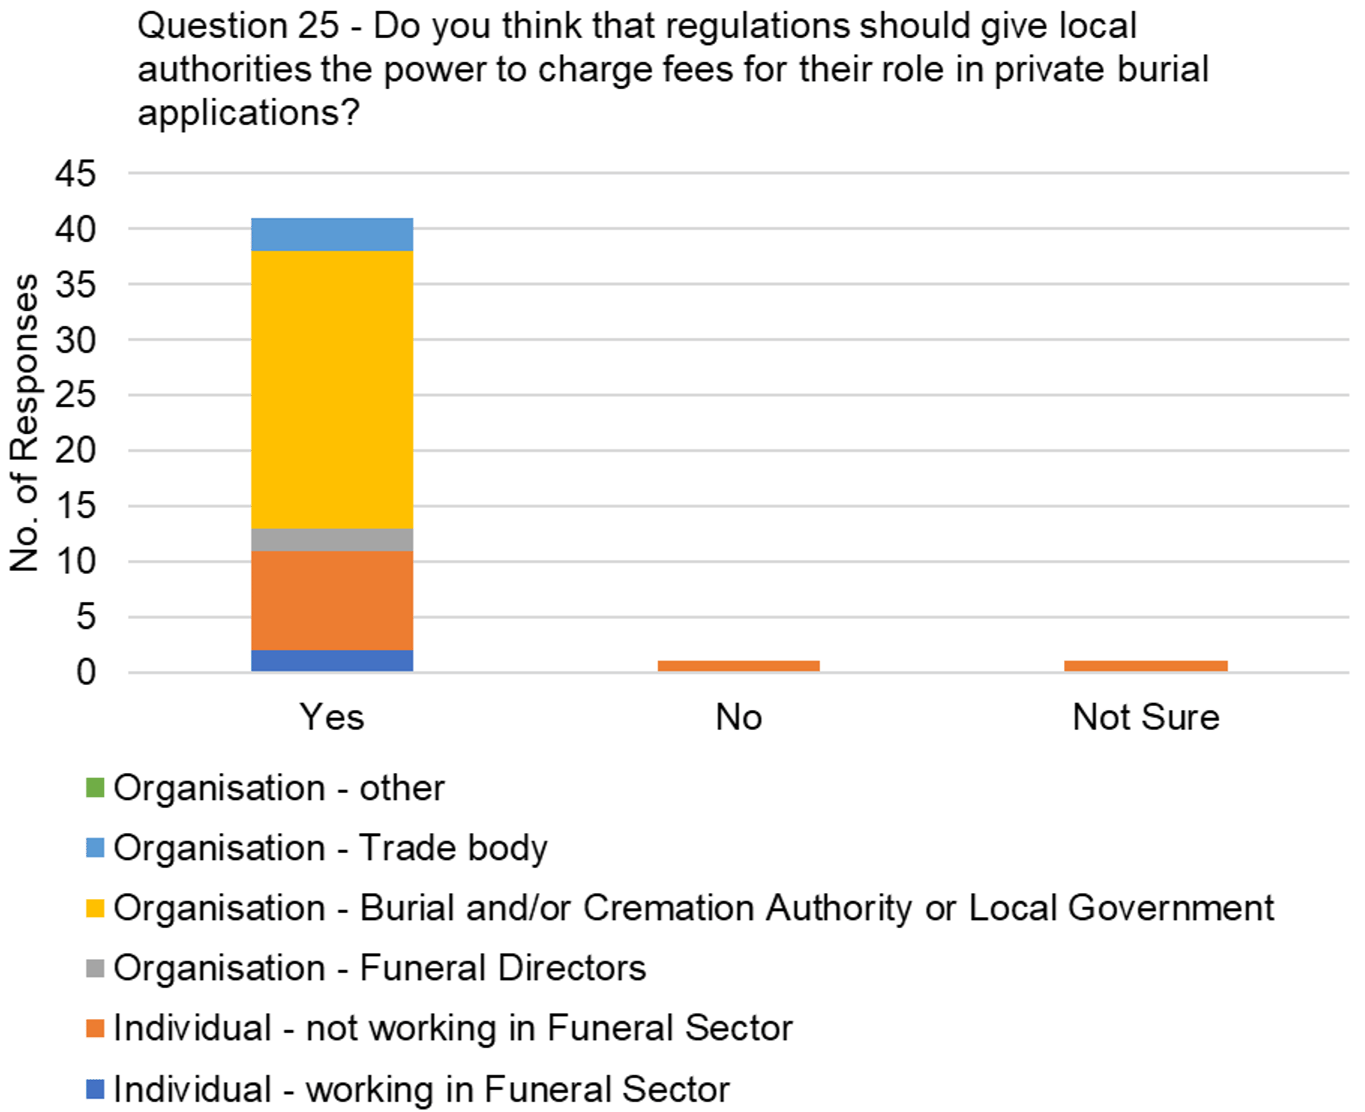 The graph visually presents the data from table 18, focussing on the responses to the question, "Do you think that regulations should give local authorities the power to charge fees for their role in private burial applications?"